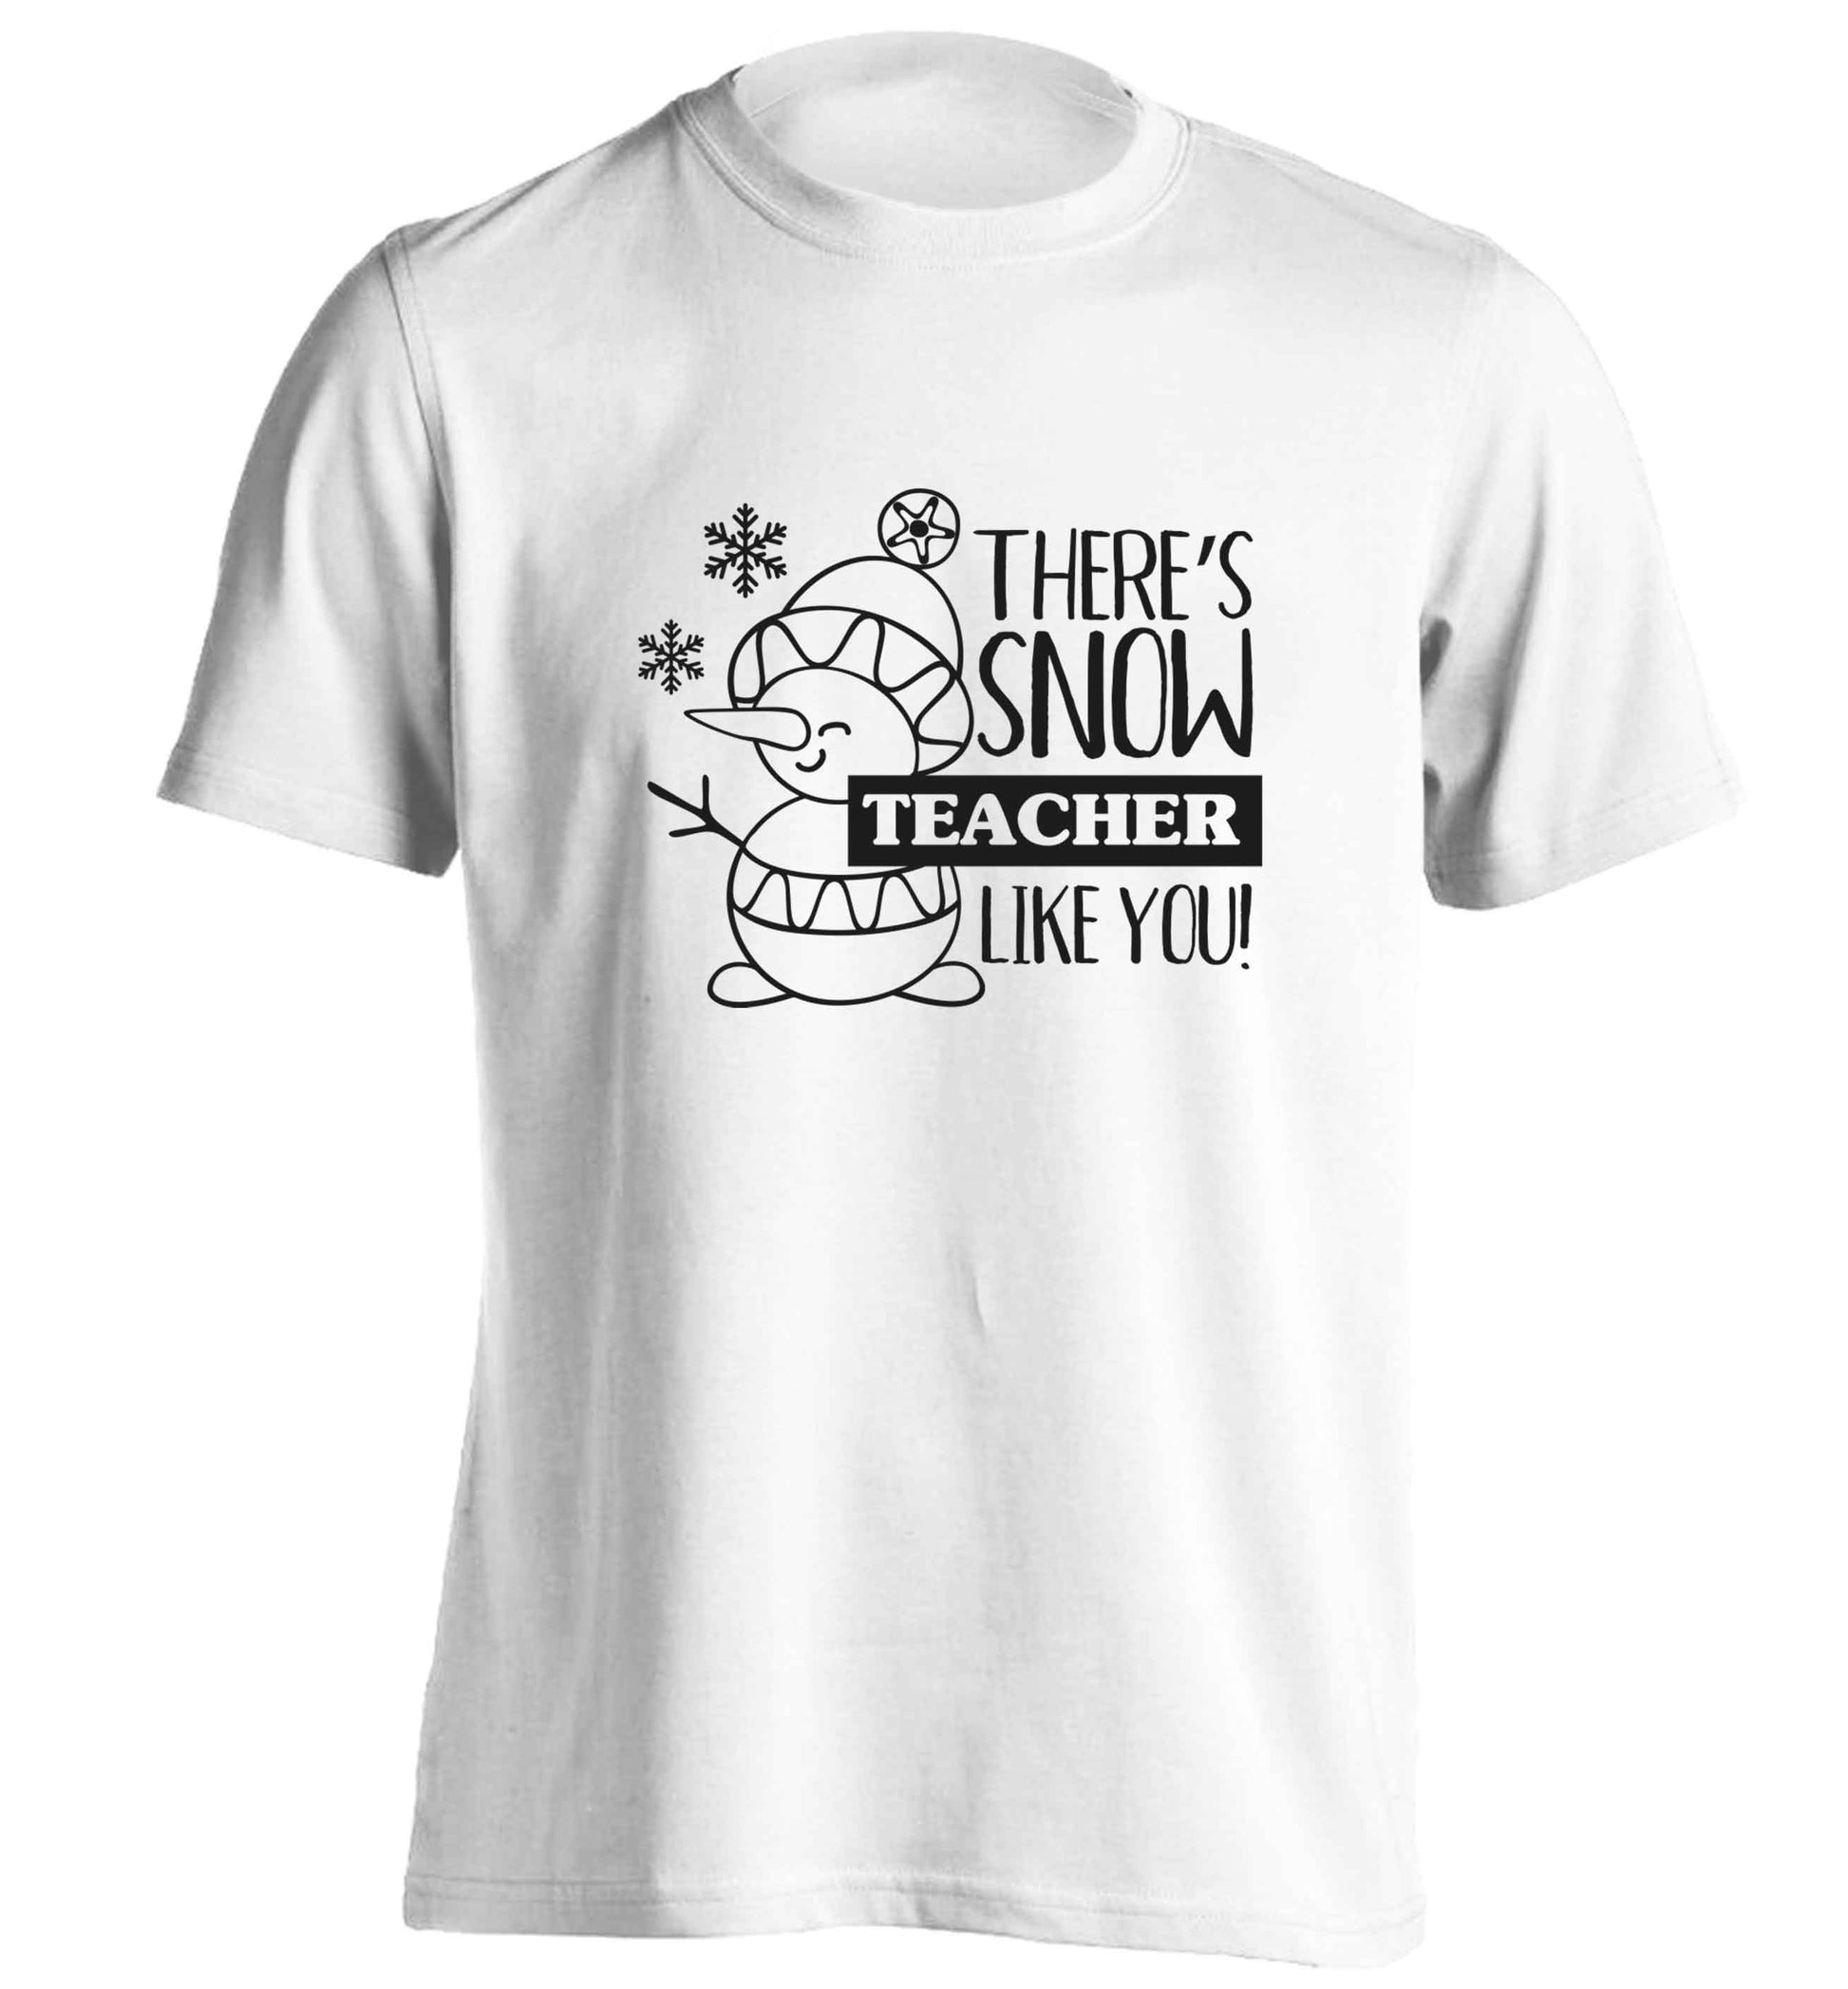 There's snow teacher like you adults unisex white Tshirt 2XL